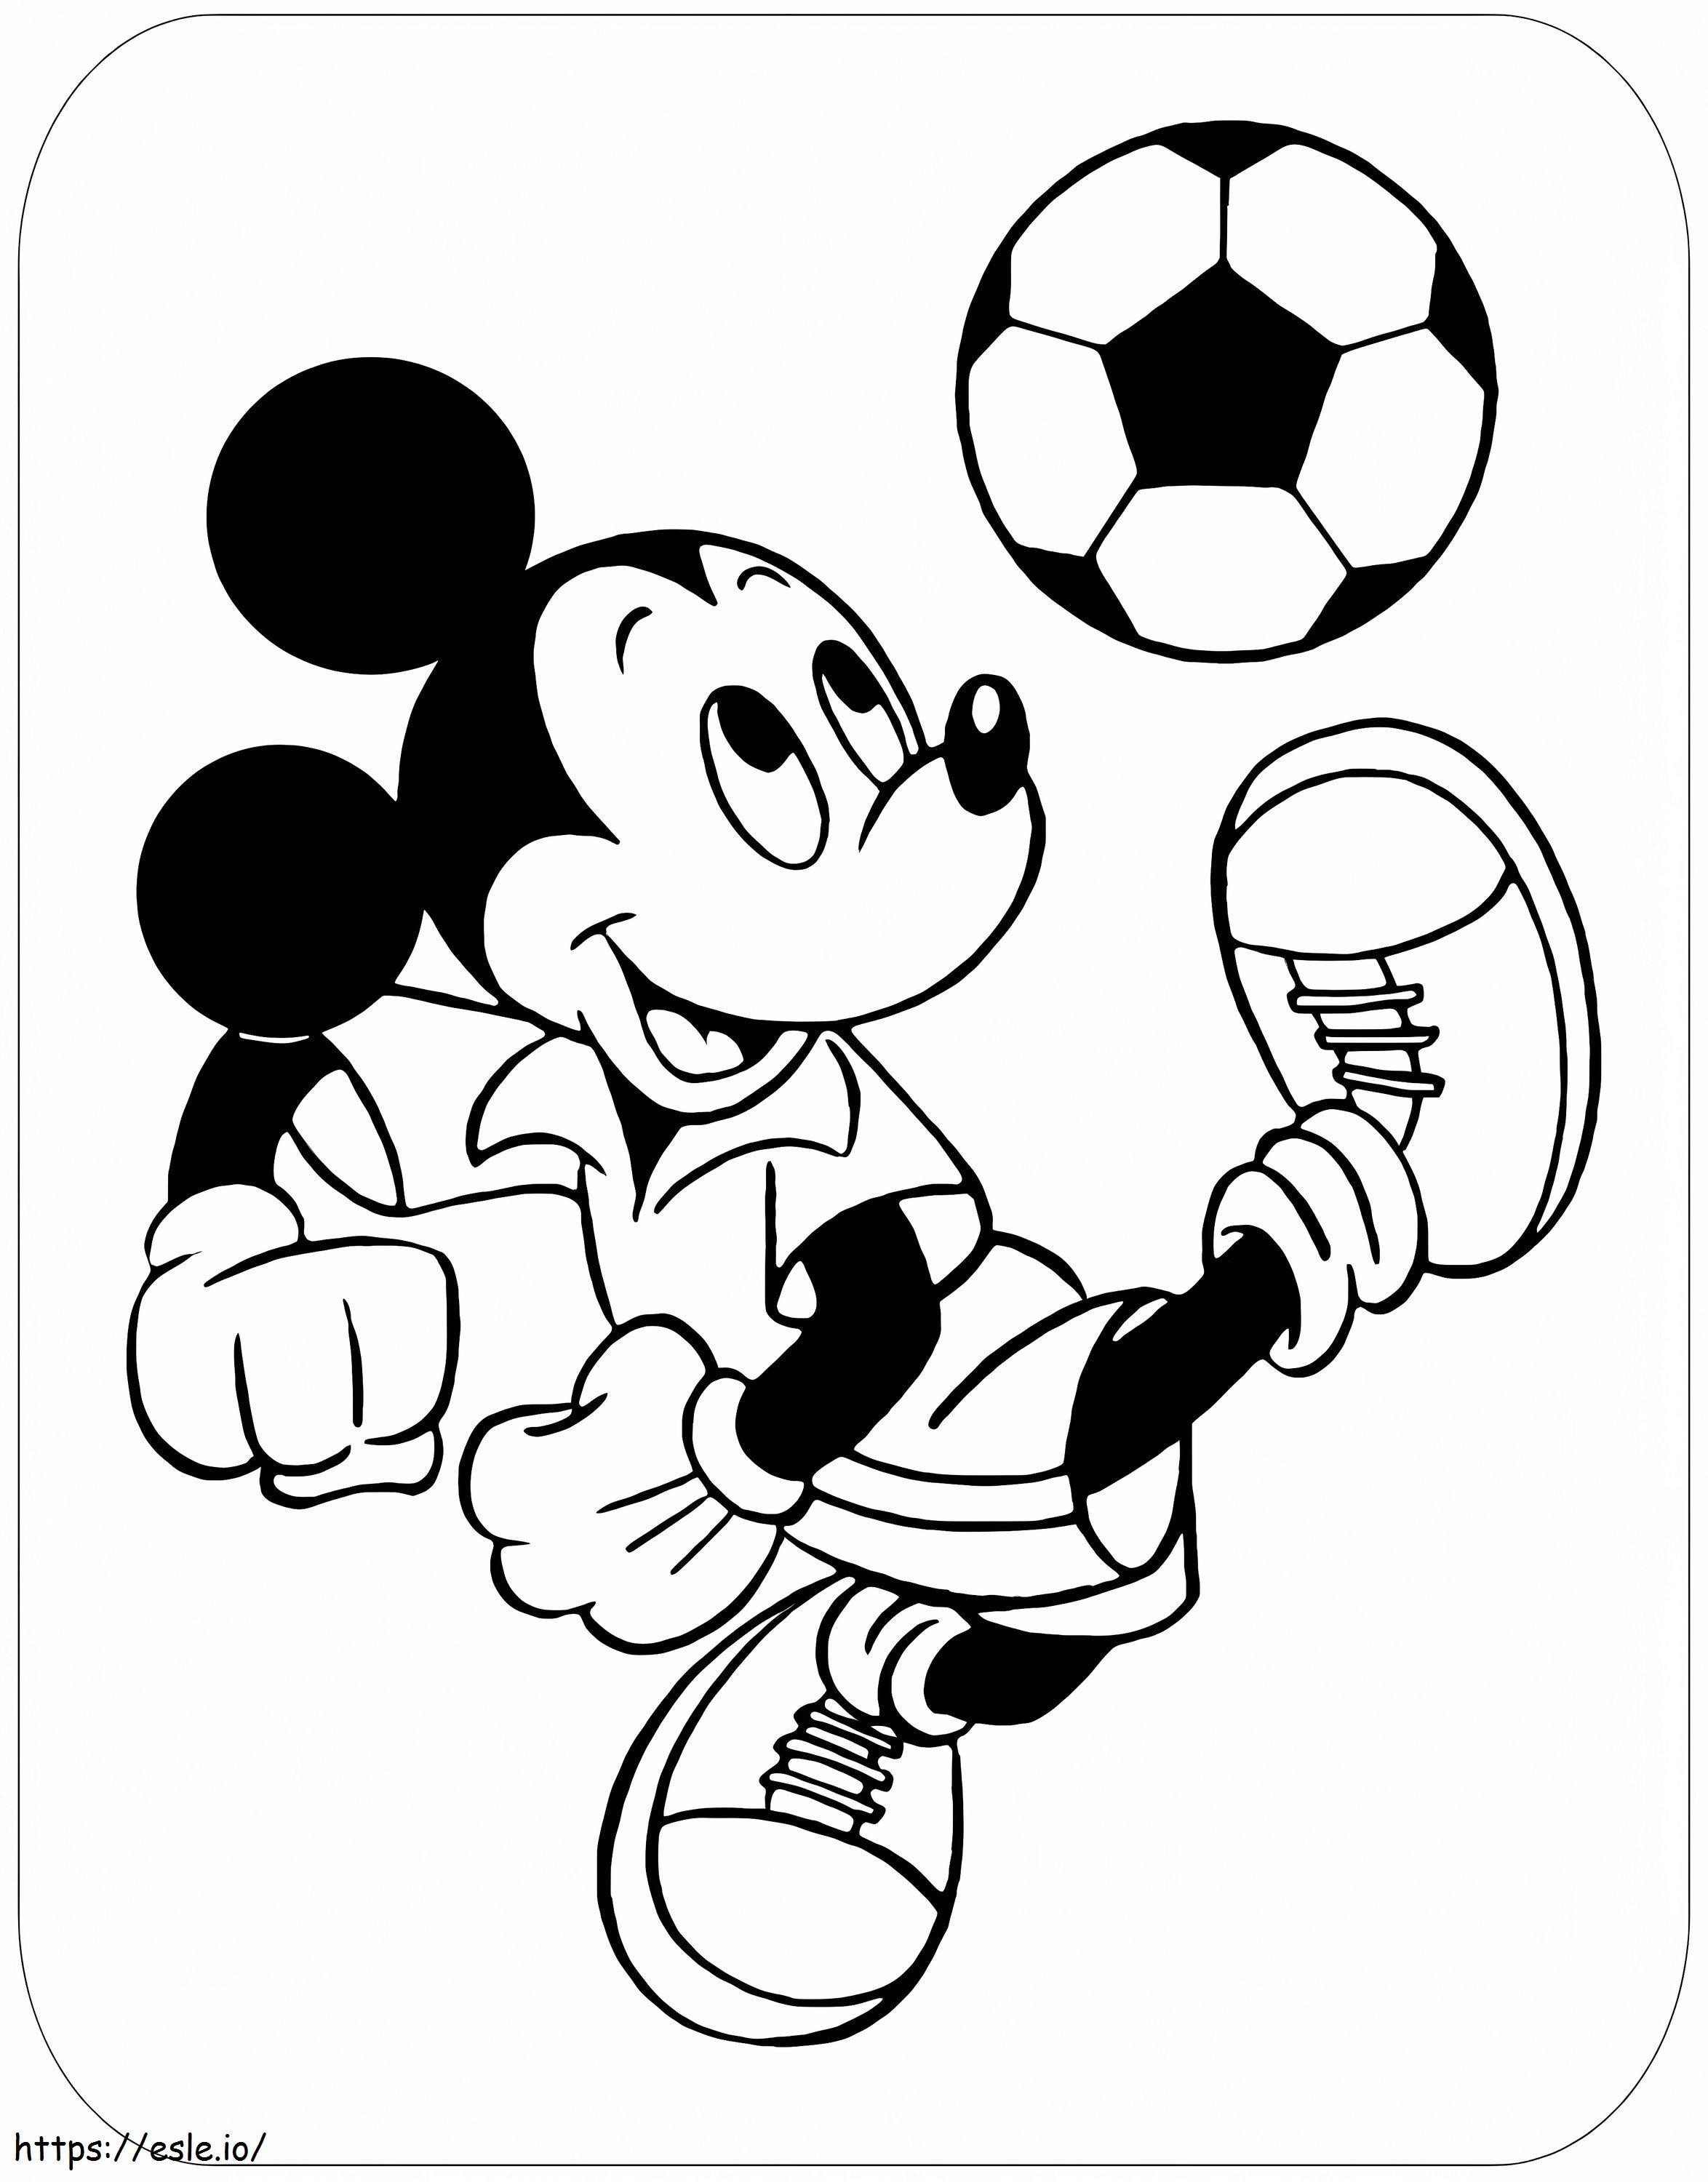 Mickey Mouse Playing Soccer coloring page